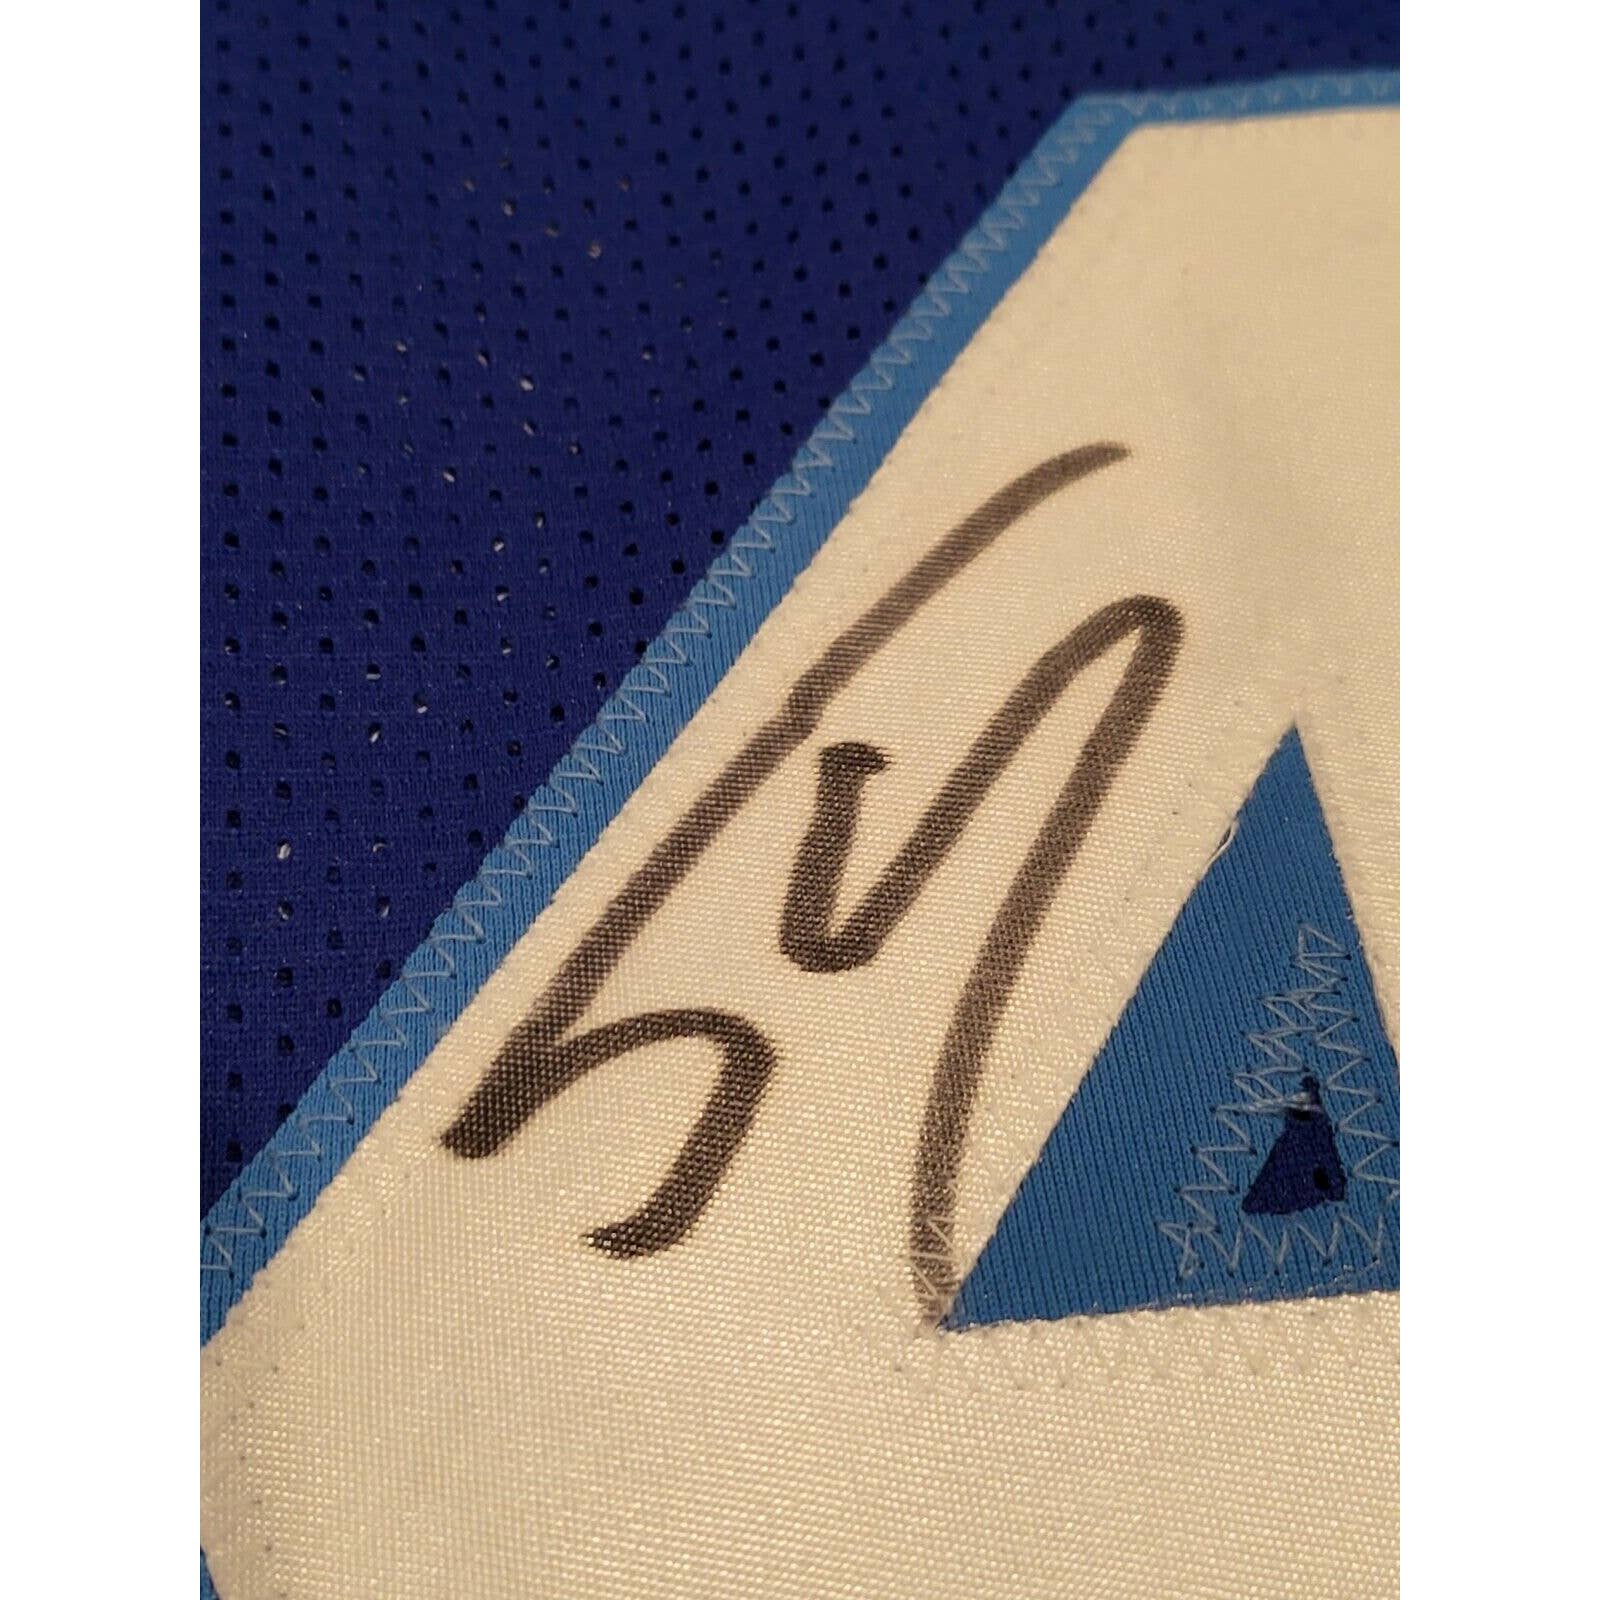 Shaquille O’Neal Autographed/Signed Jersey Beckett Sticker Los Angeles Lakers - TreasuresEvolved